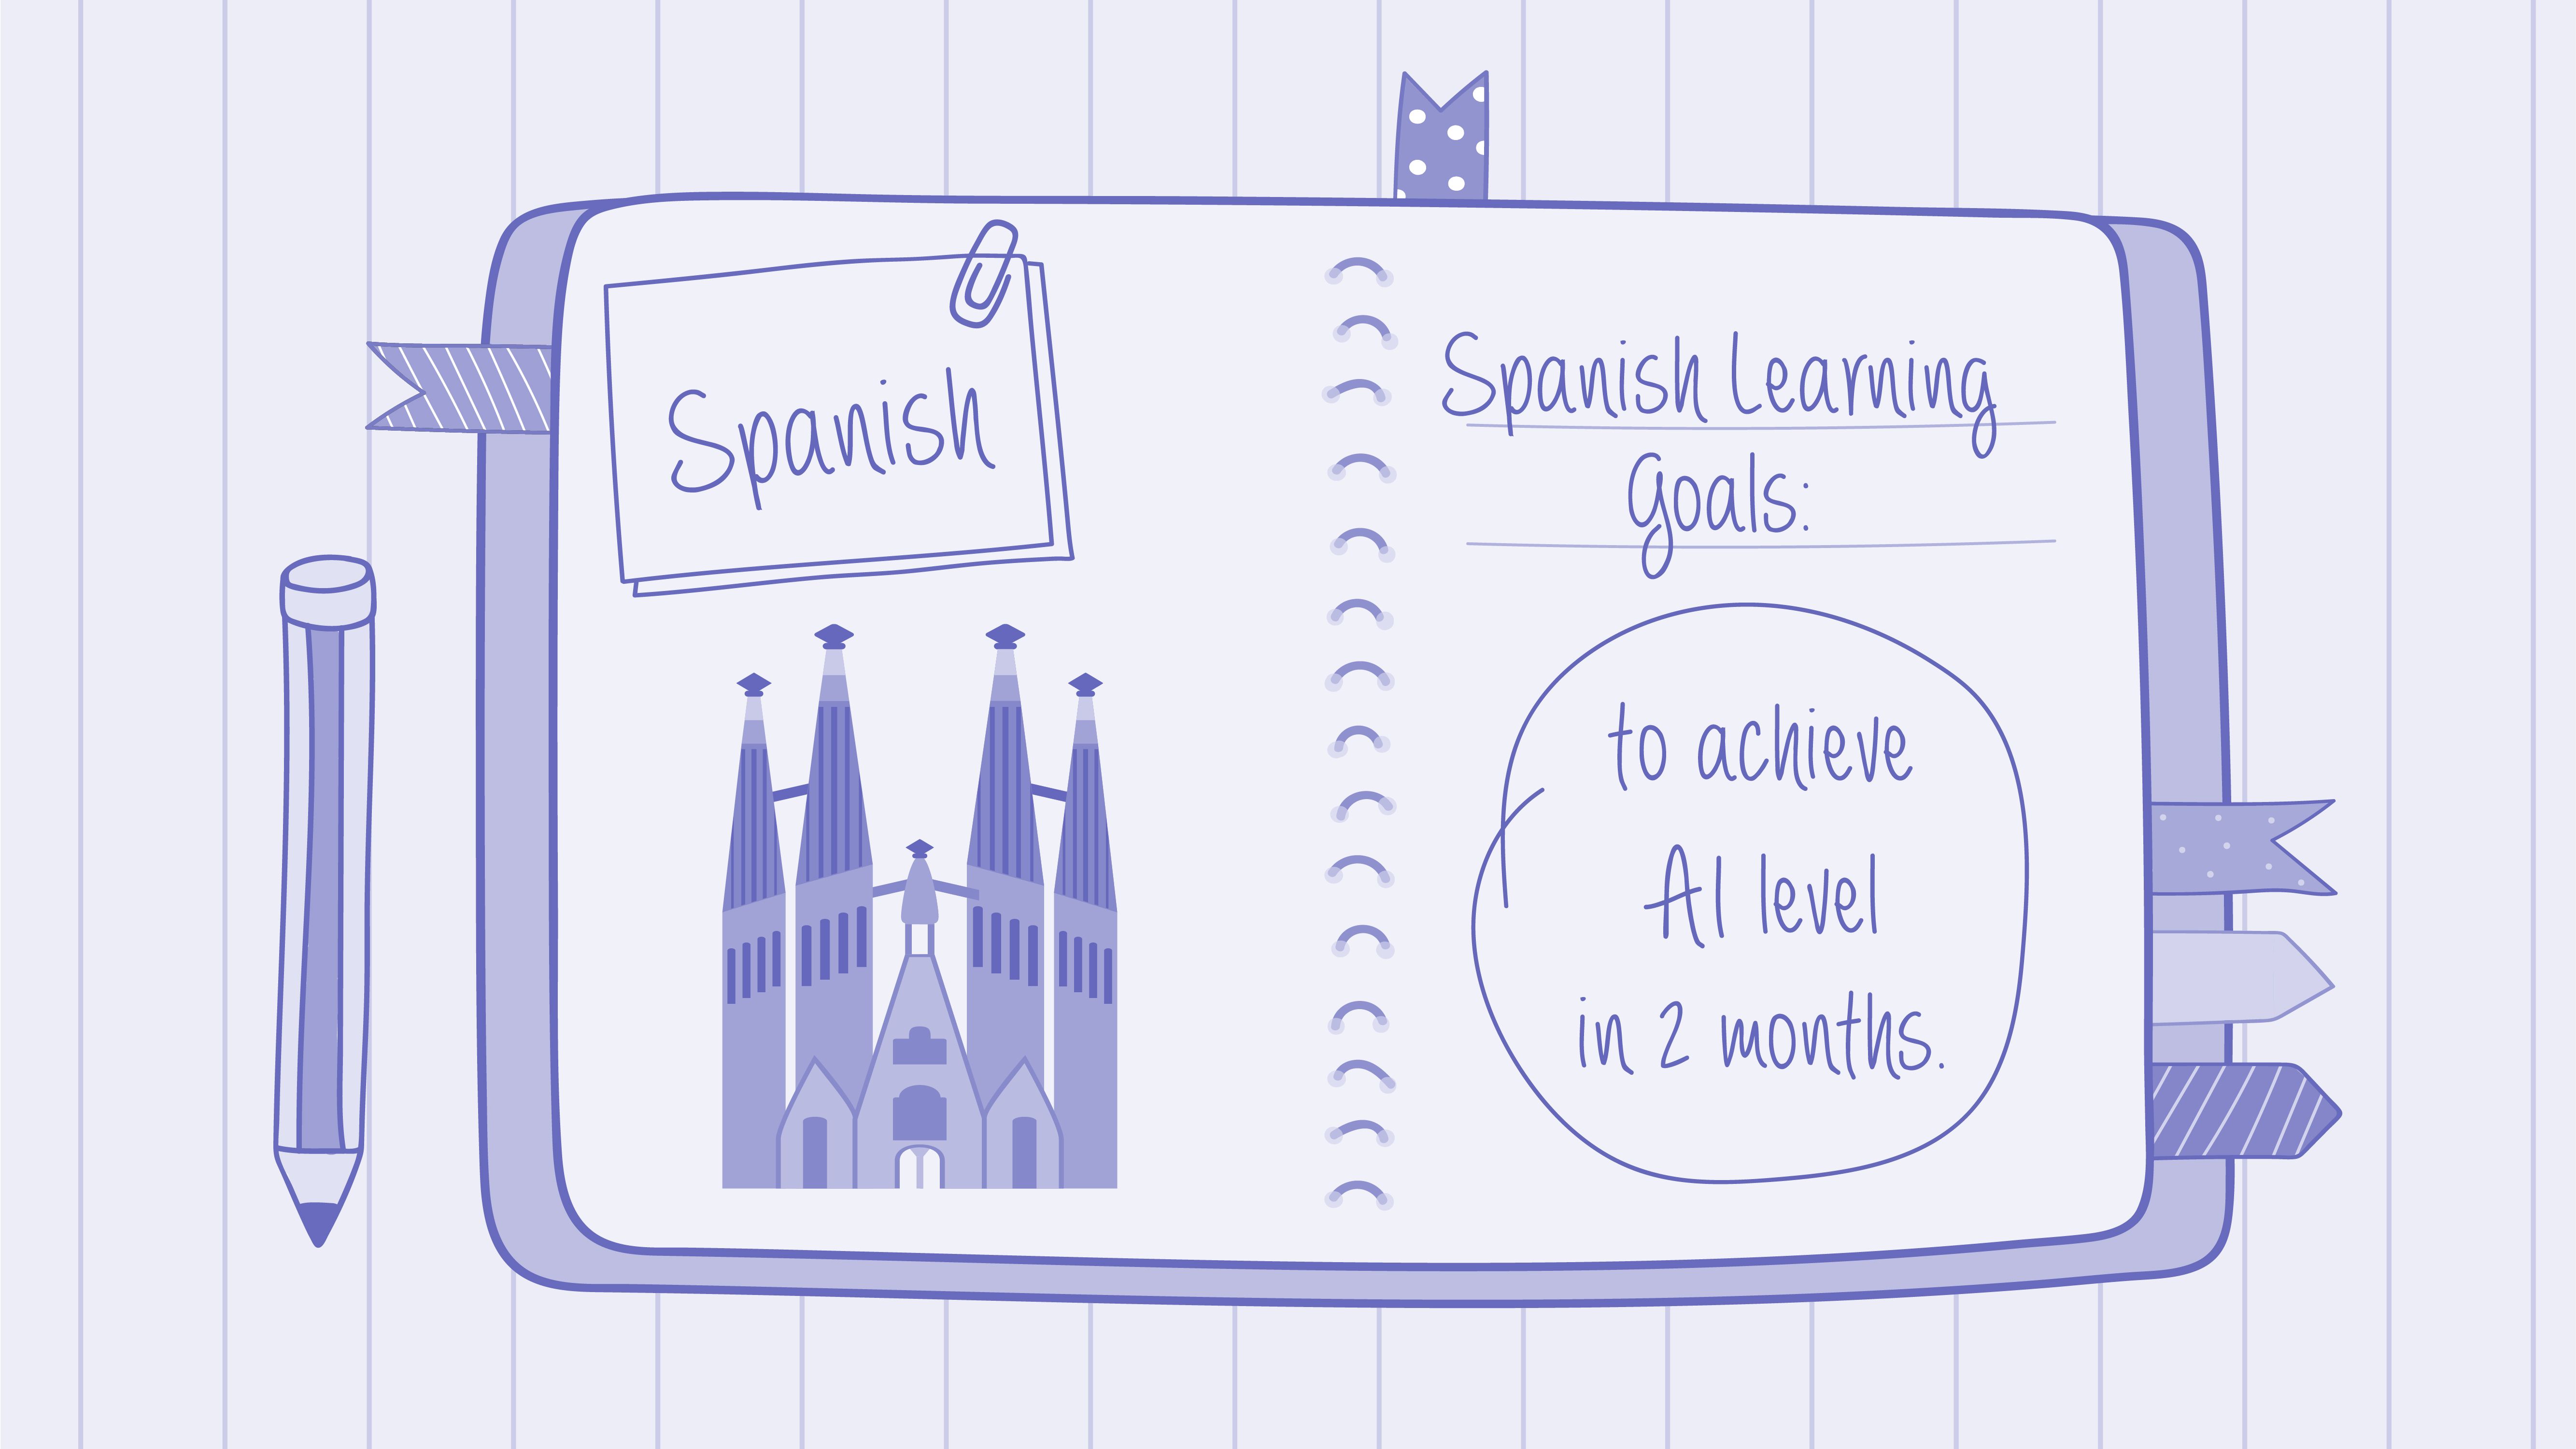 Soren writes down his Spanish learning goals in the notebook, the most important one says, “reaching A1 level in 2 months.”